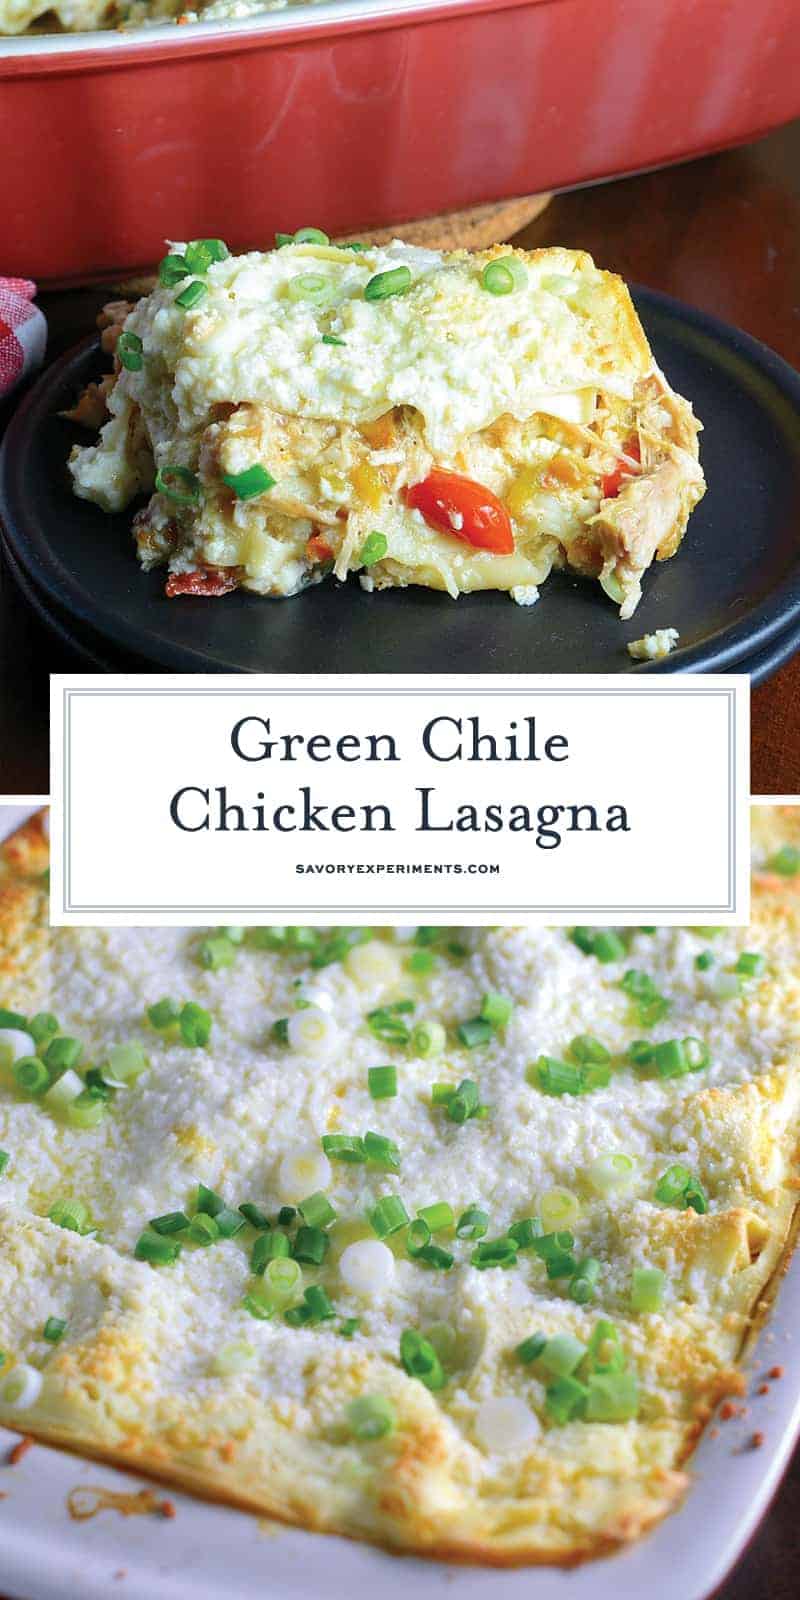 Green Chile Chicken Lasagna | Savory Experiments